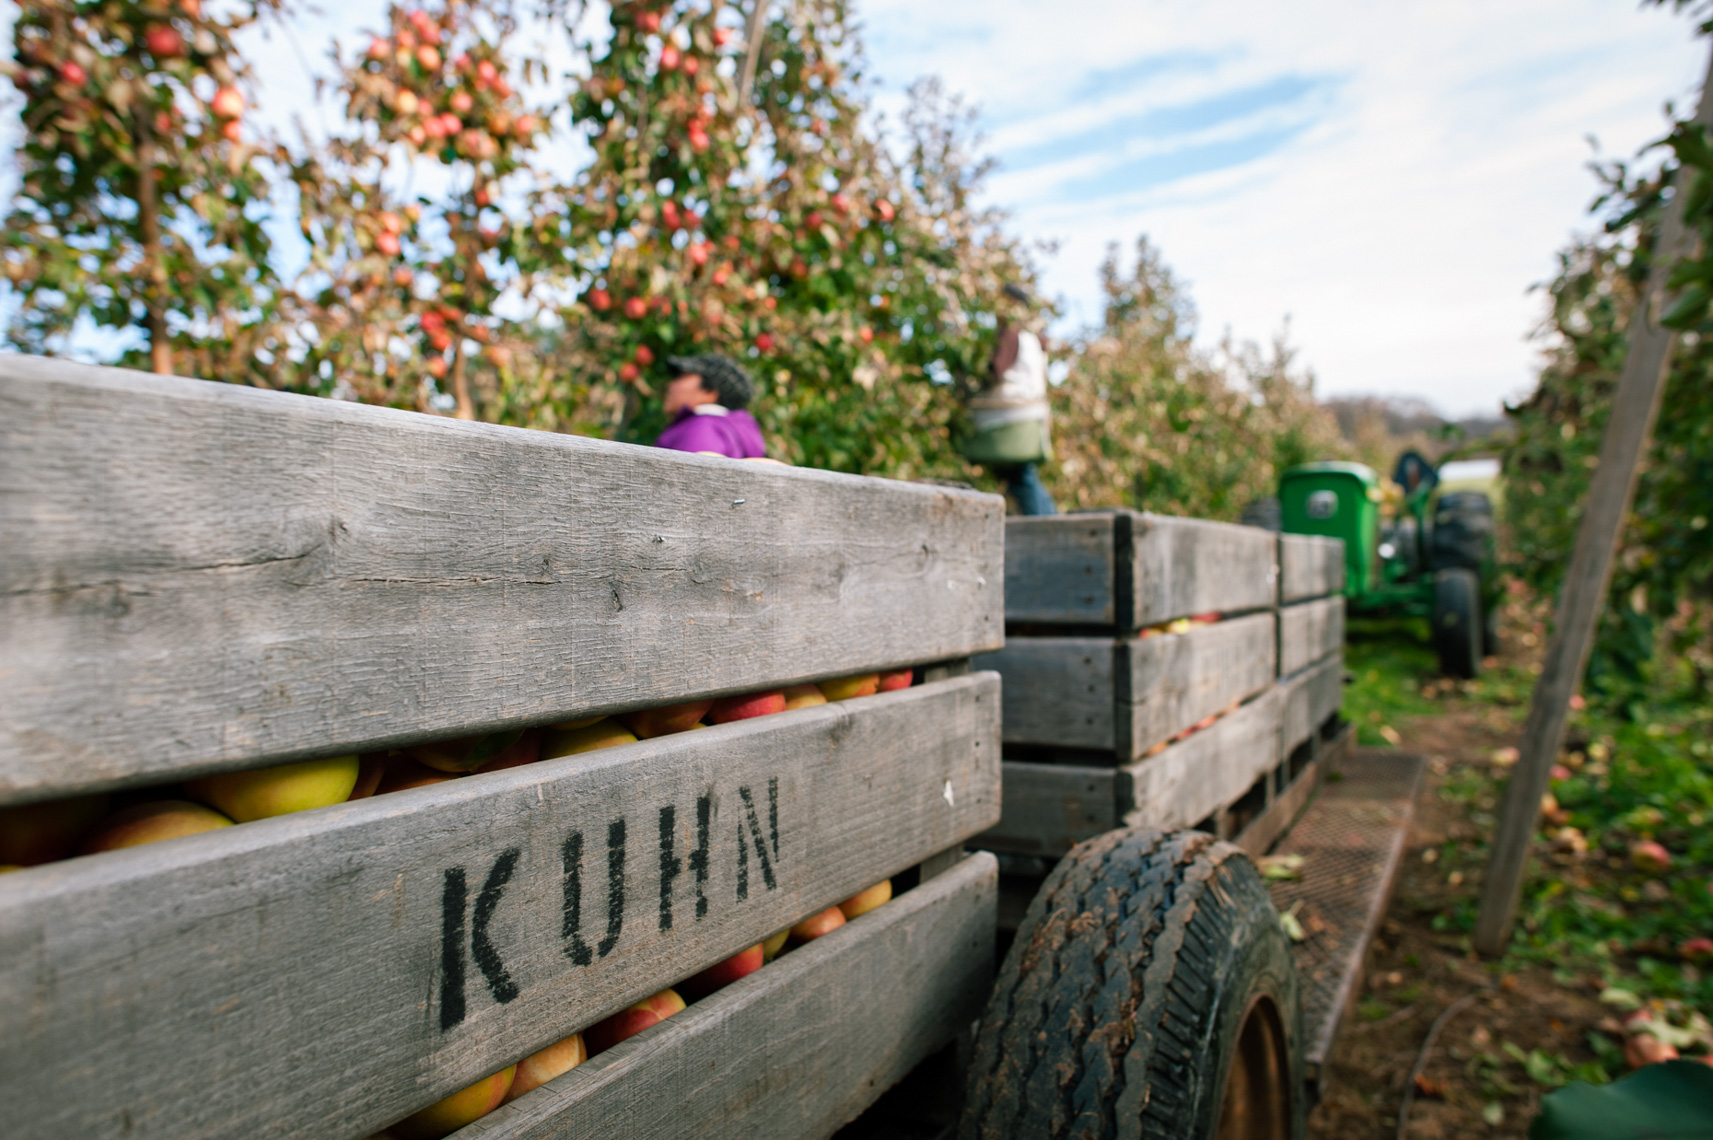 Kuhn Orchards
